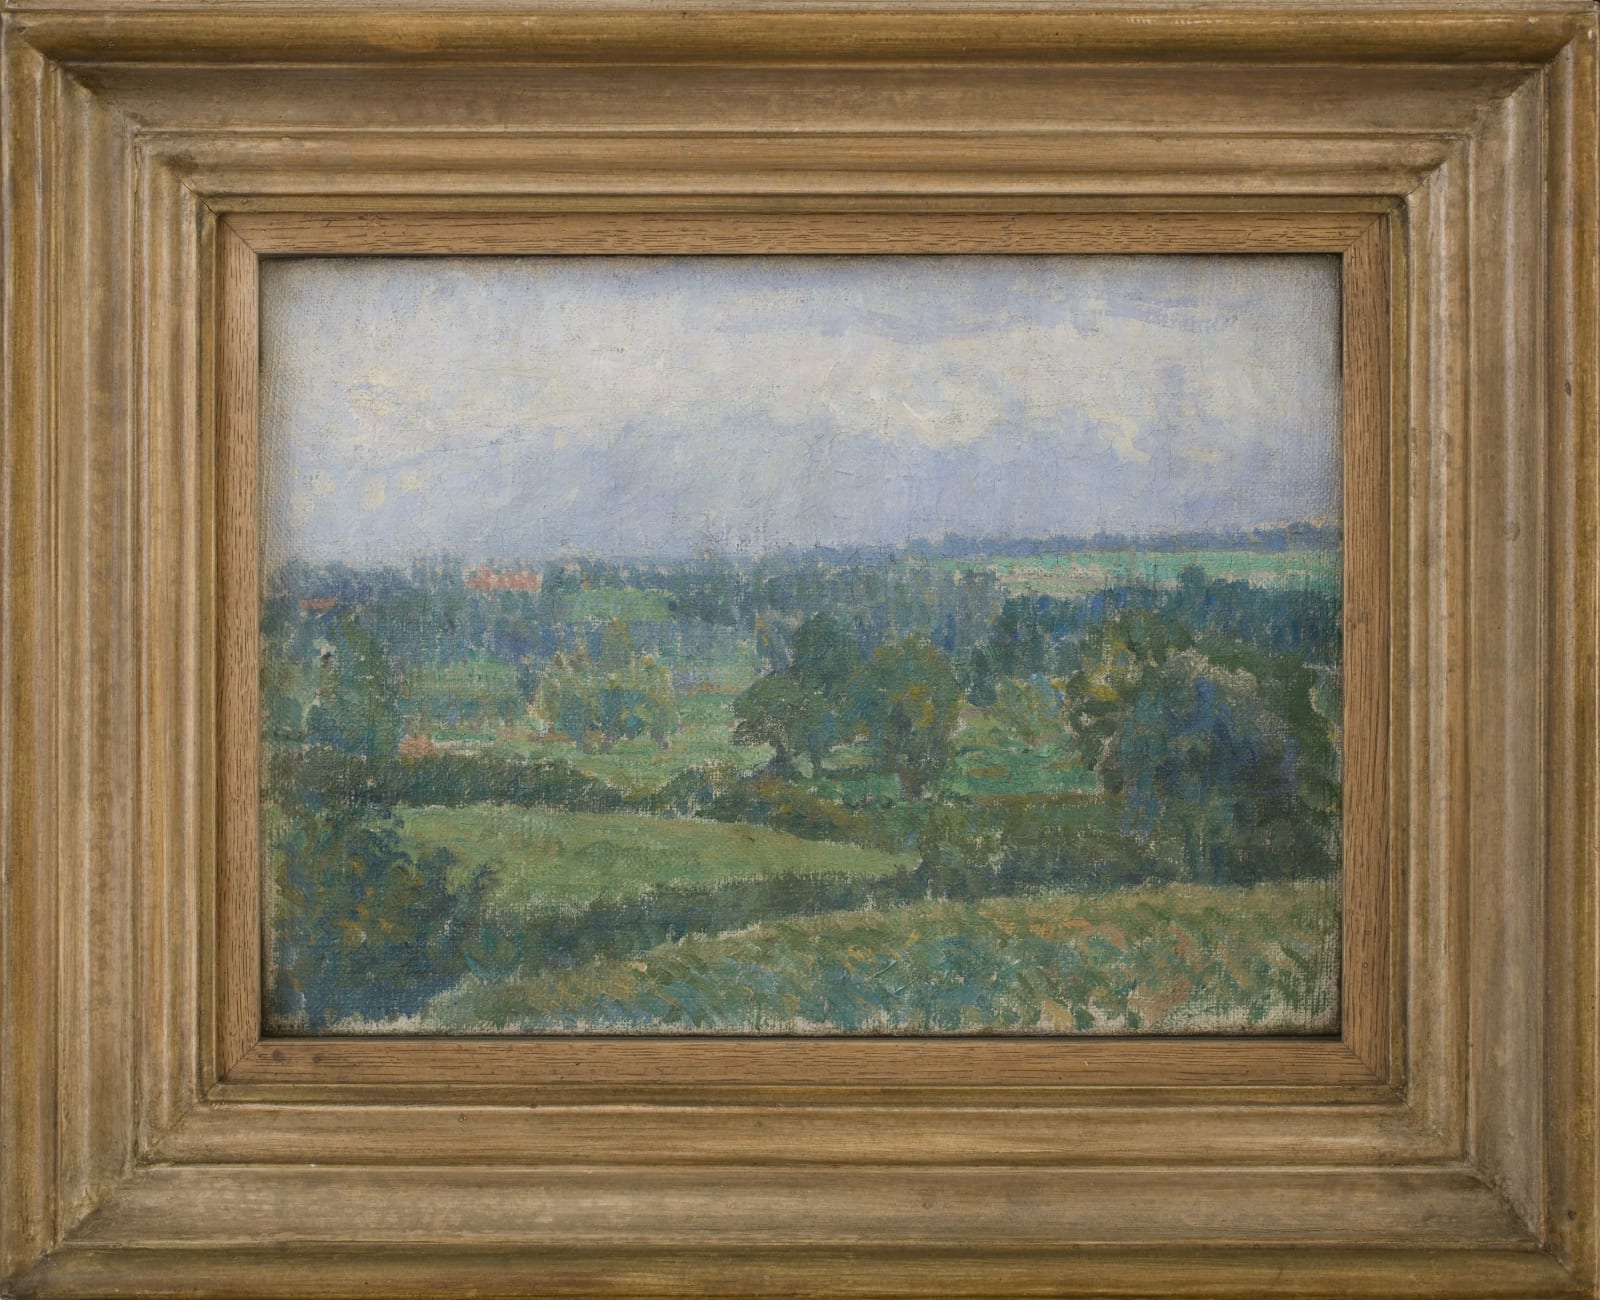 Spencer Gore, Country Landscape, 1909-10, c.